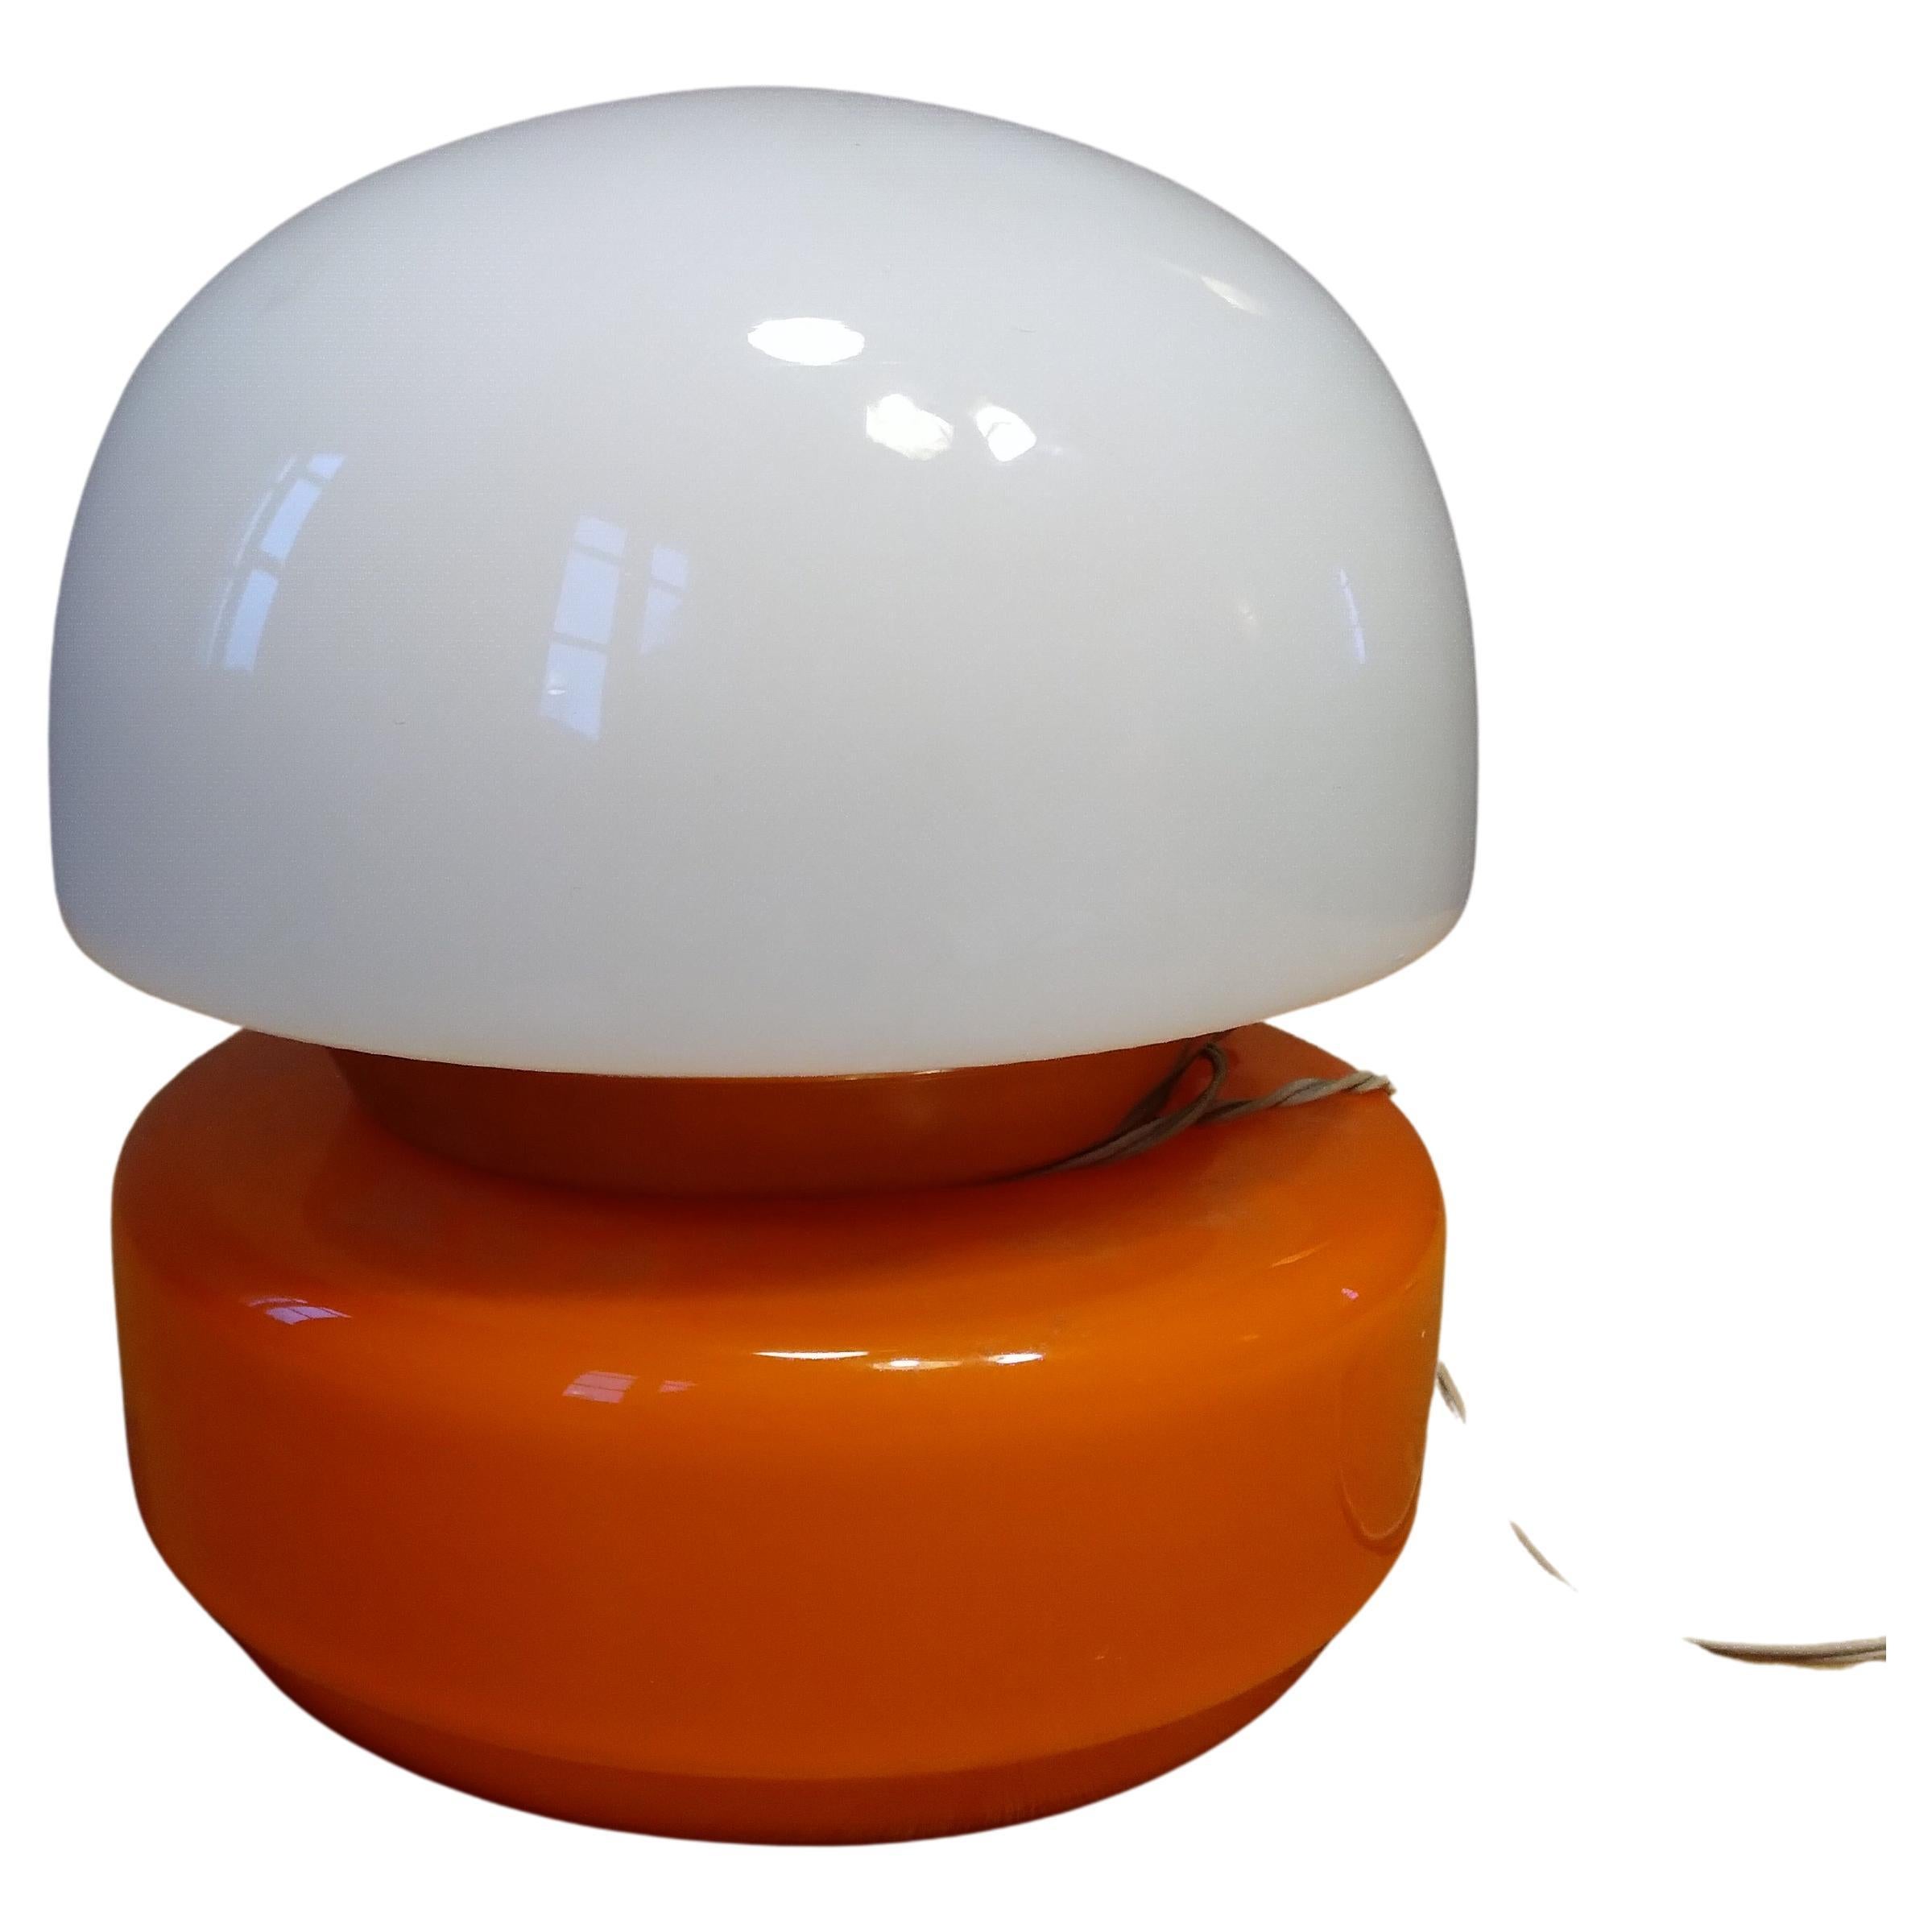 Space Age table lamp in Orange and White Artistic Glass Italy 1960s .
Fantastic lamp amazing color . 